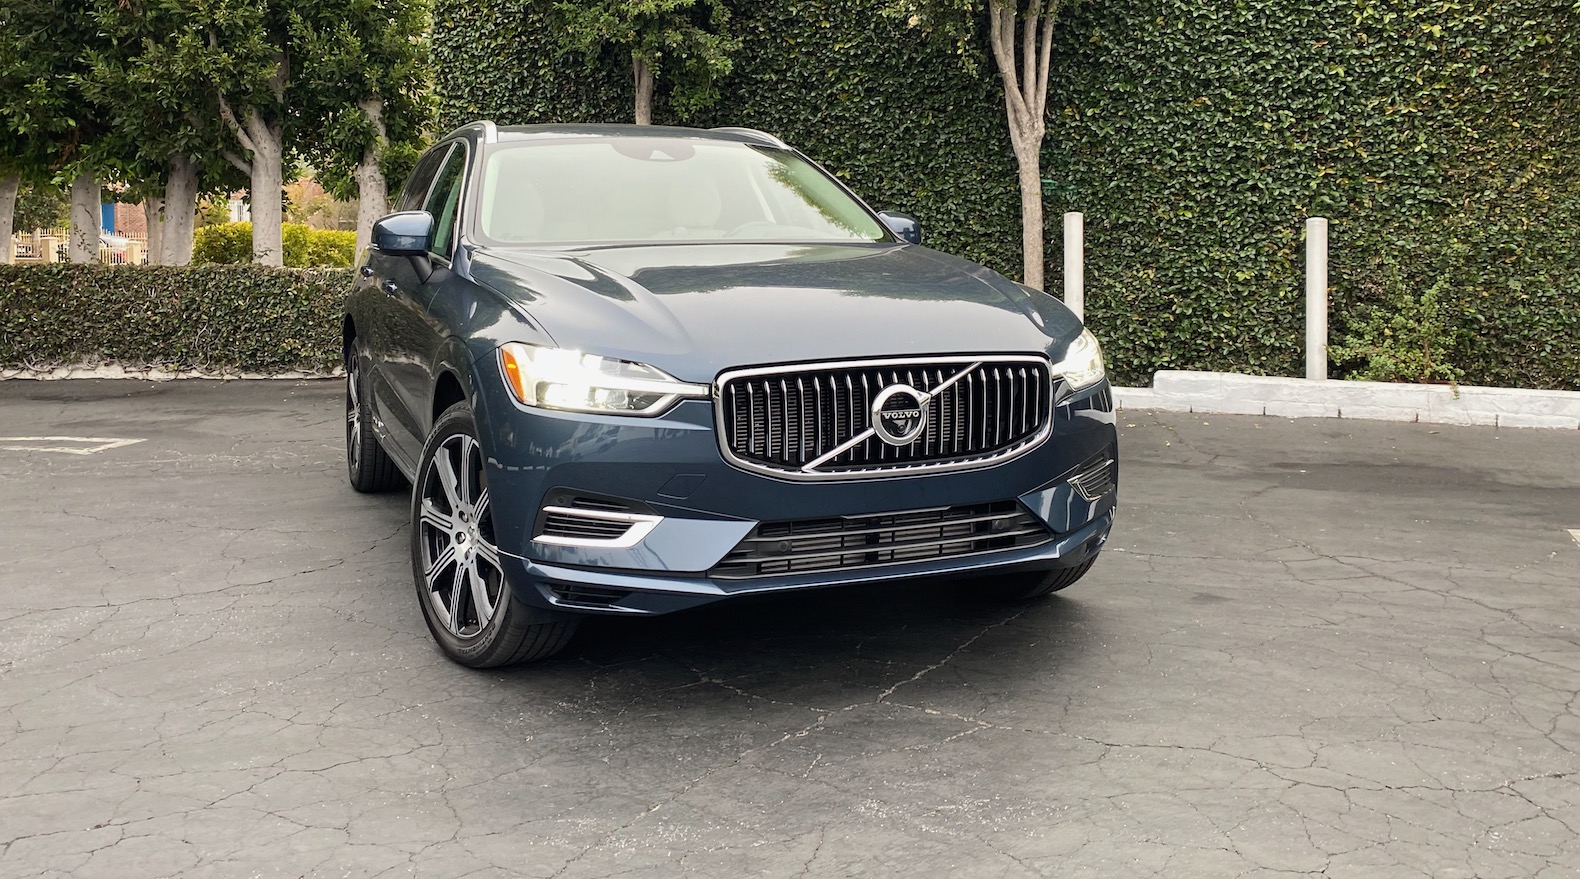 2021 Volvo XC60 Recharge Review: A good plug-in hybrid - The Torque Report